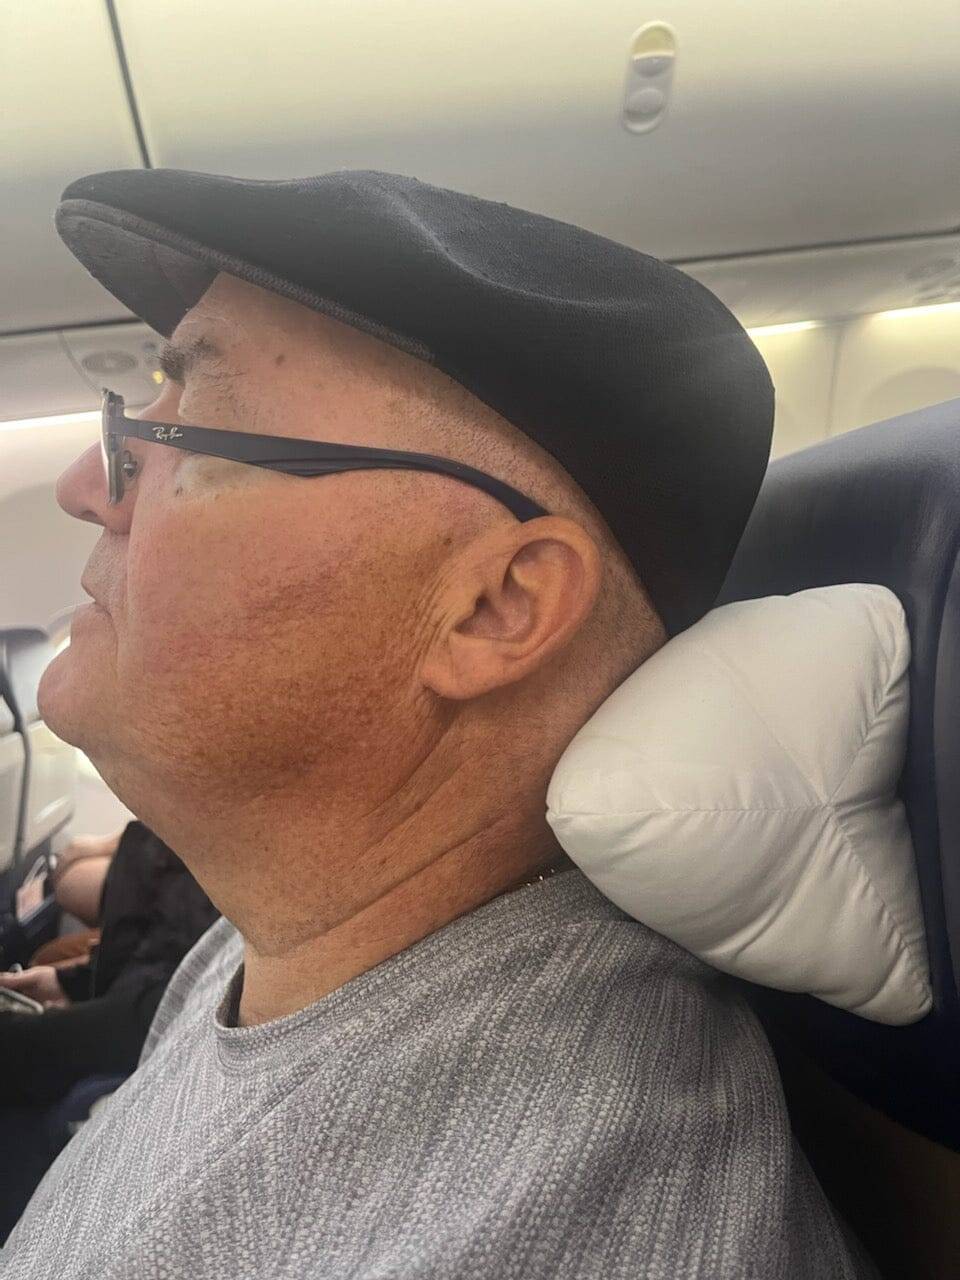 The neck-o pillow being using on an airplane as a neck pillow for optimal comfort in flight